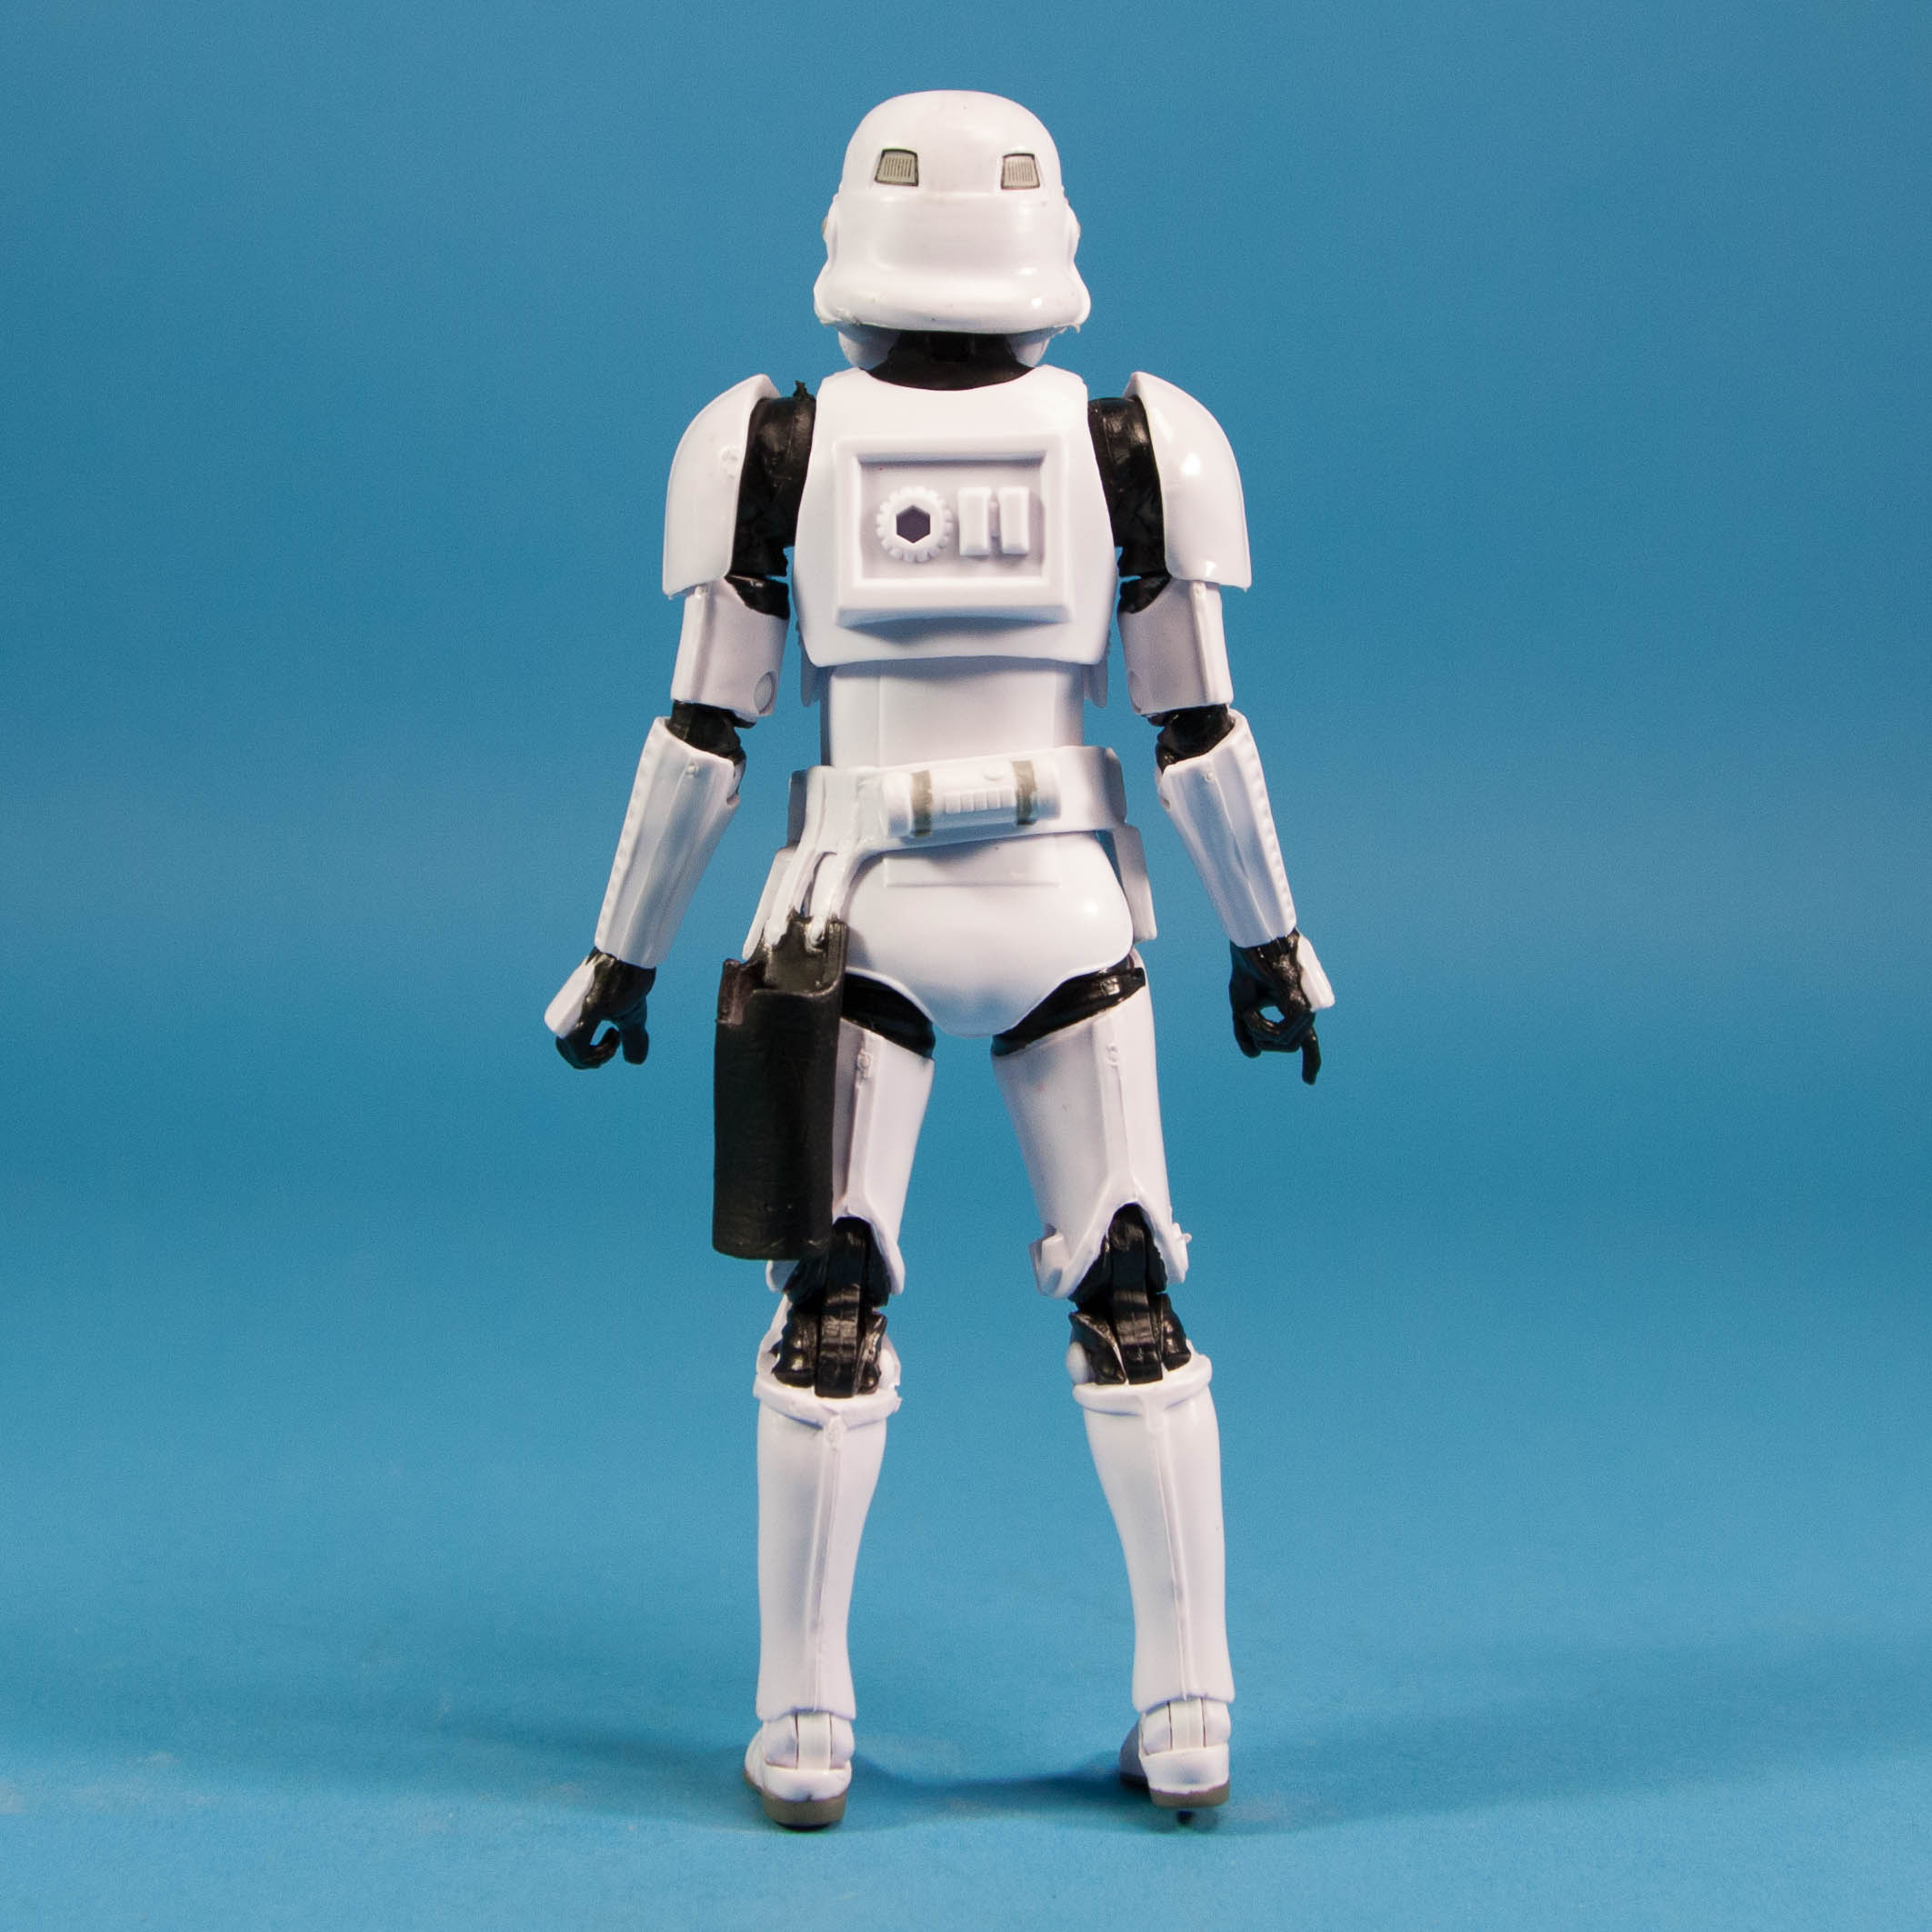 stormtrooper-collection-6-inch-4-pack-amazon-exclusive-026.jpg